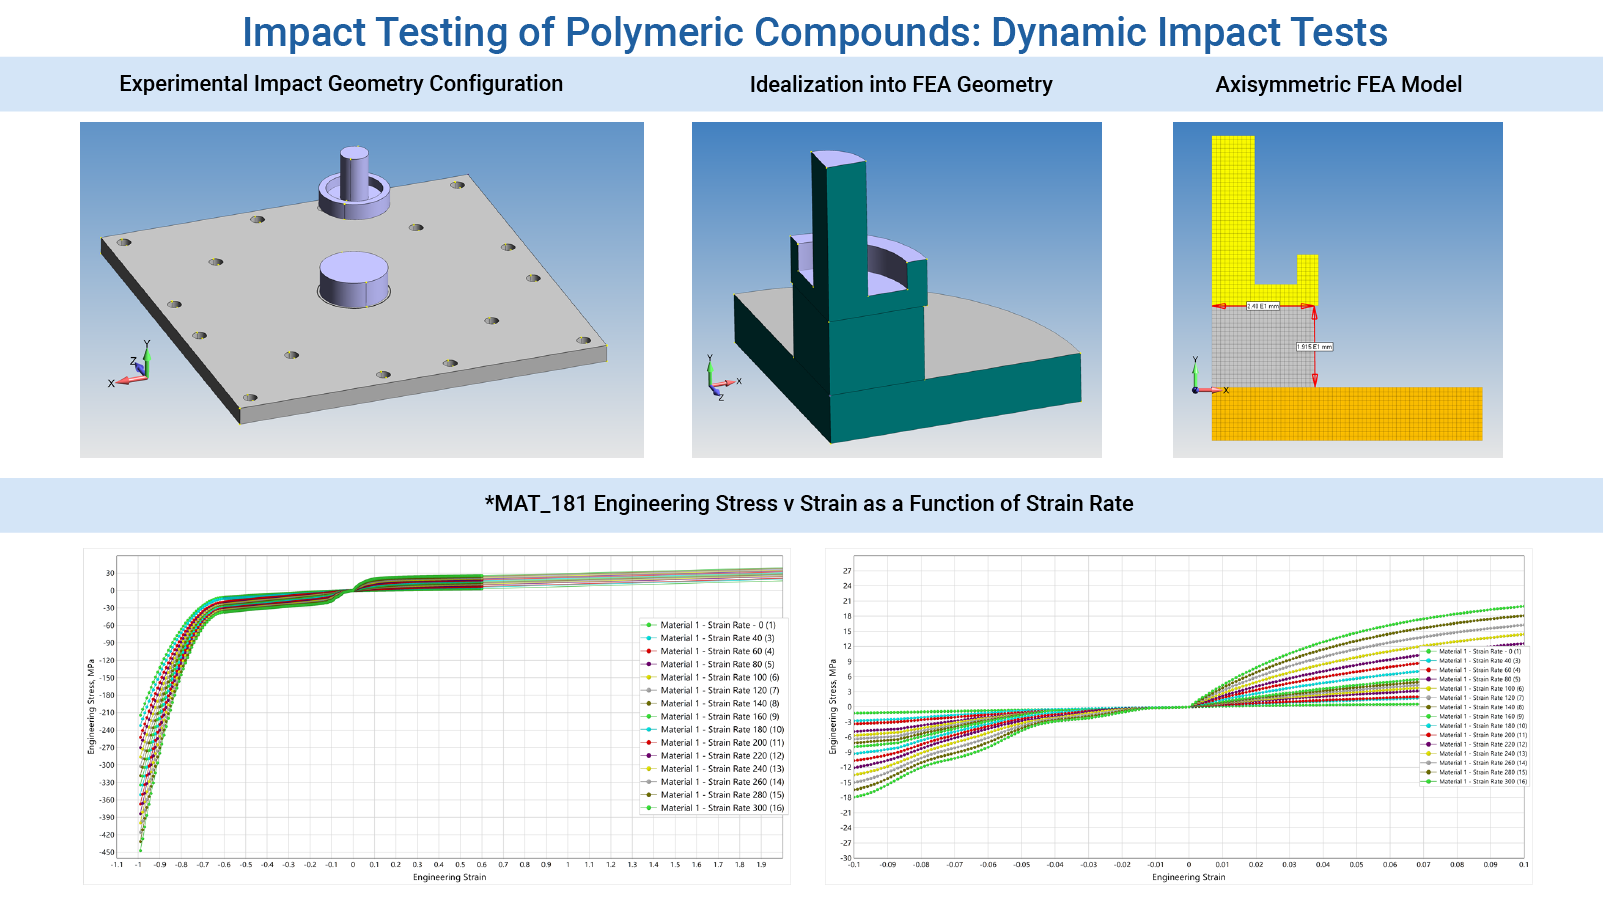 Impact Testing of Elastomeric Compounds - Dynamic Impact Tests to FEA Validation using LS-DYNA Engineering Services